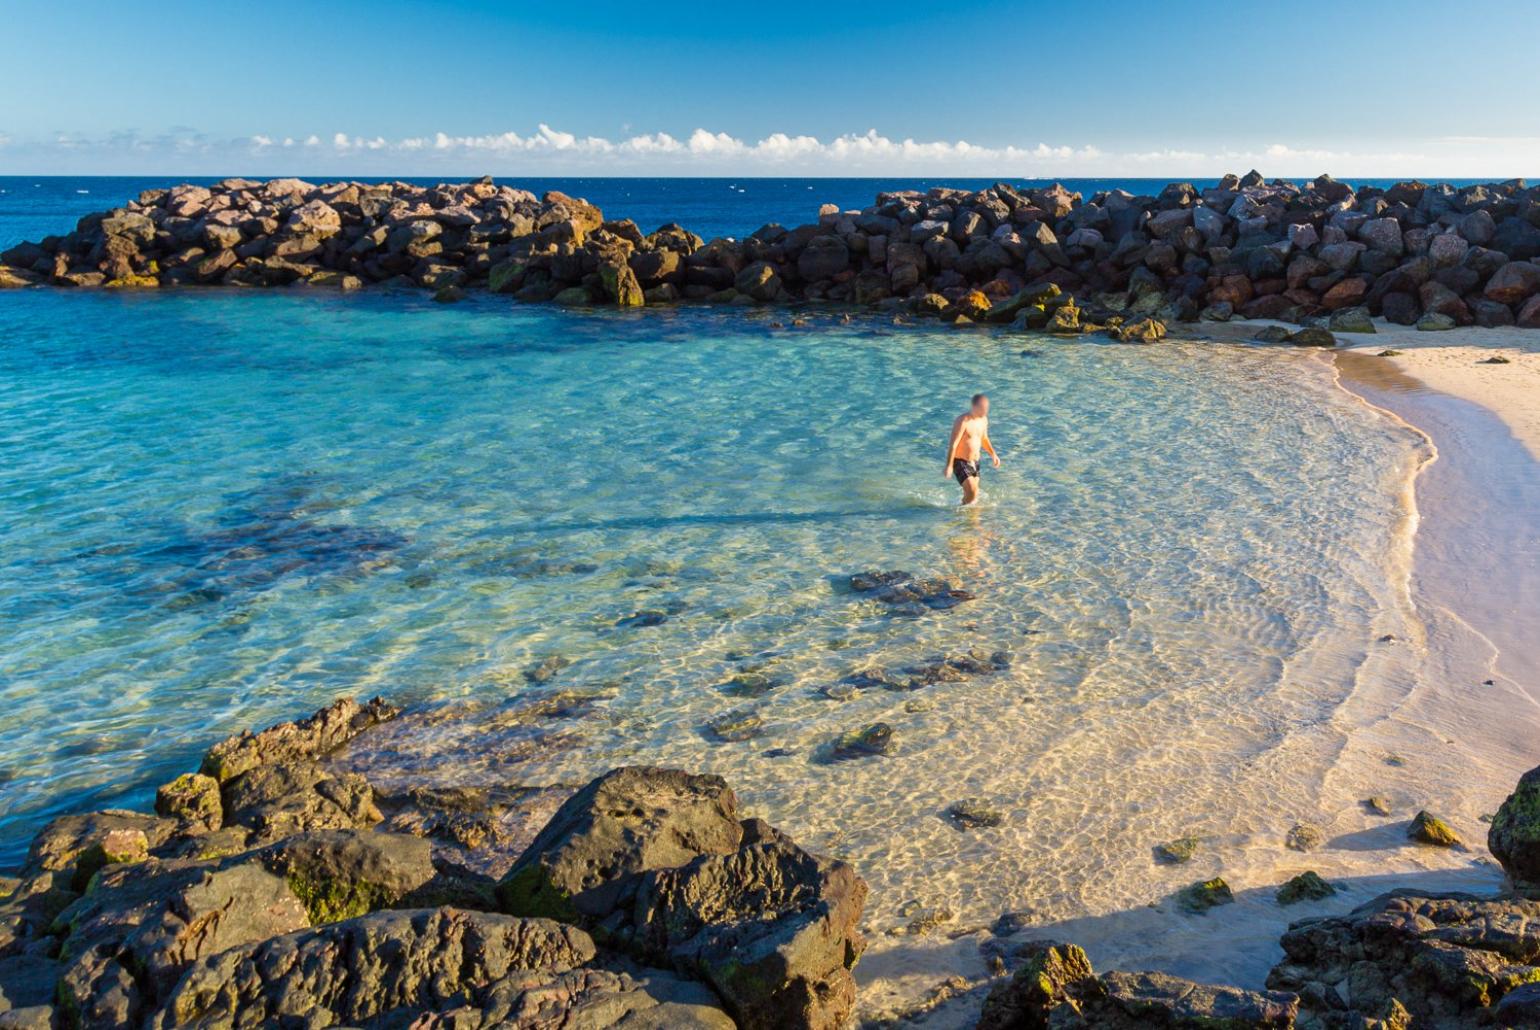 Bathe in crystal clear waters at Costa Teguise